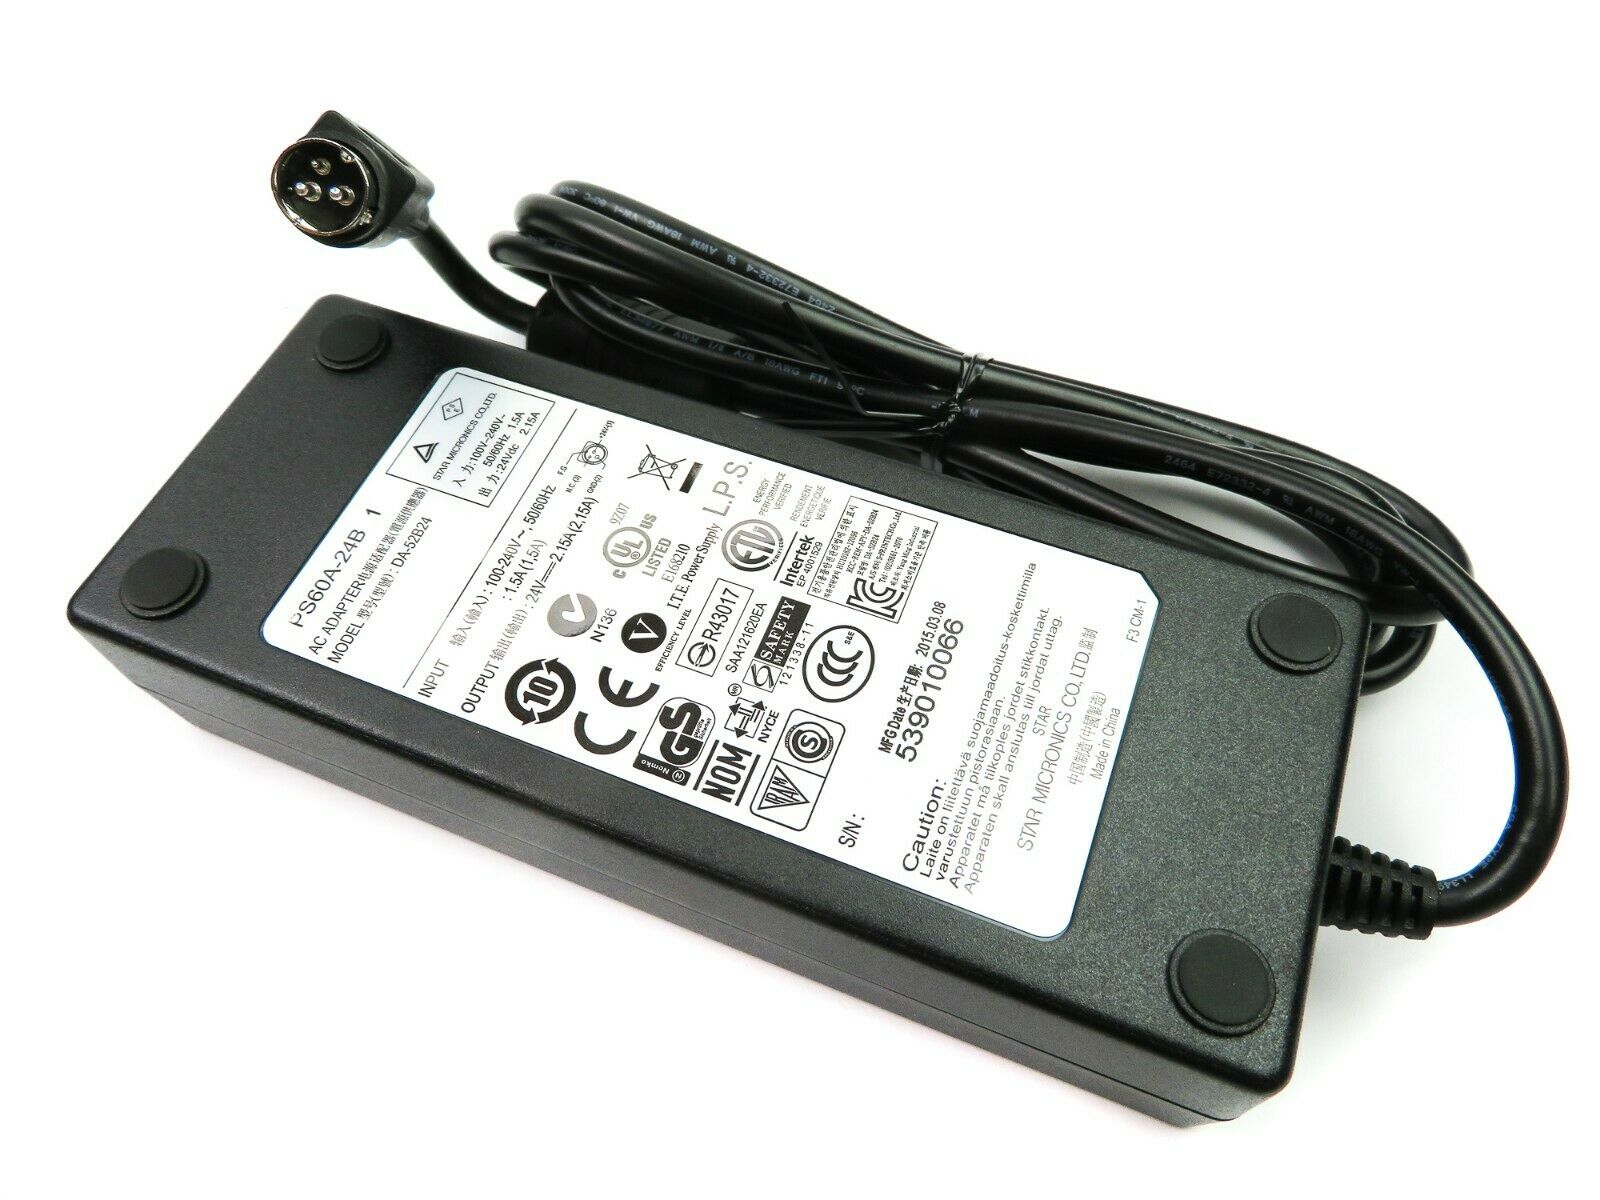 STAR receipt printer power adapter for TSP800/700 and more *NEW* Type: Power Adapter Features: new MPN: PS60A-24B